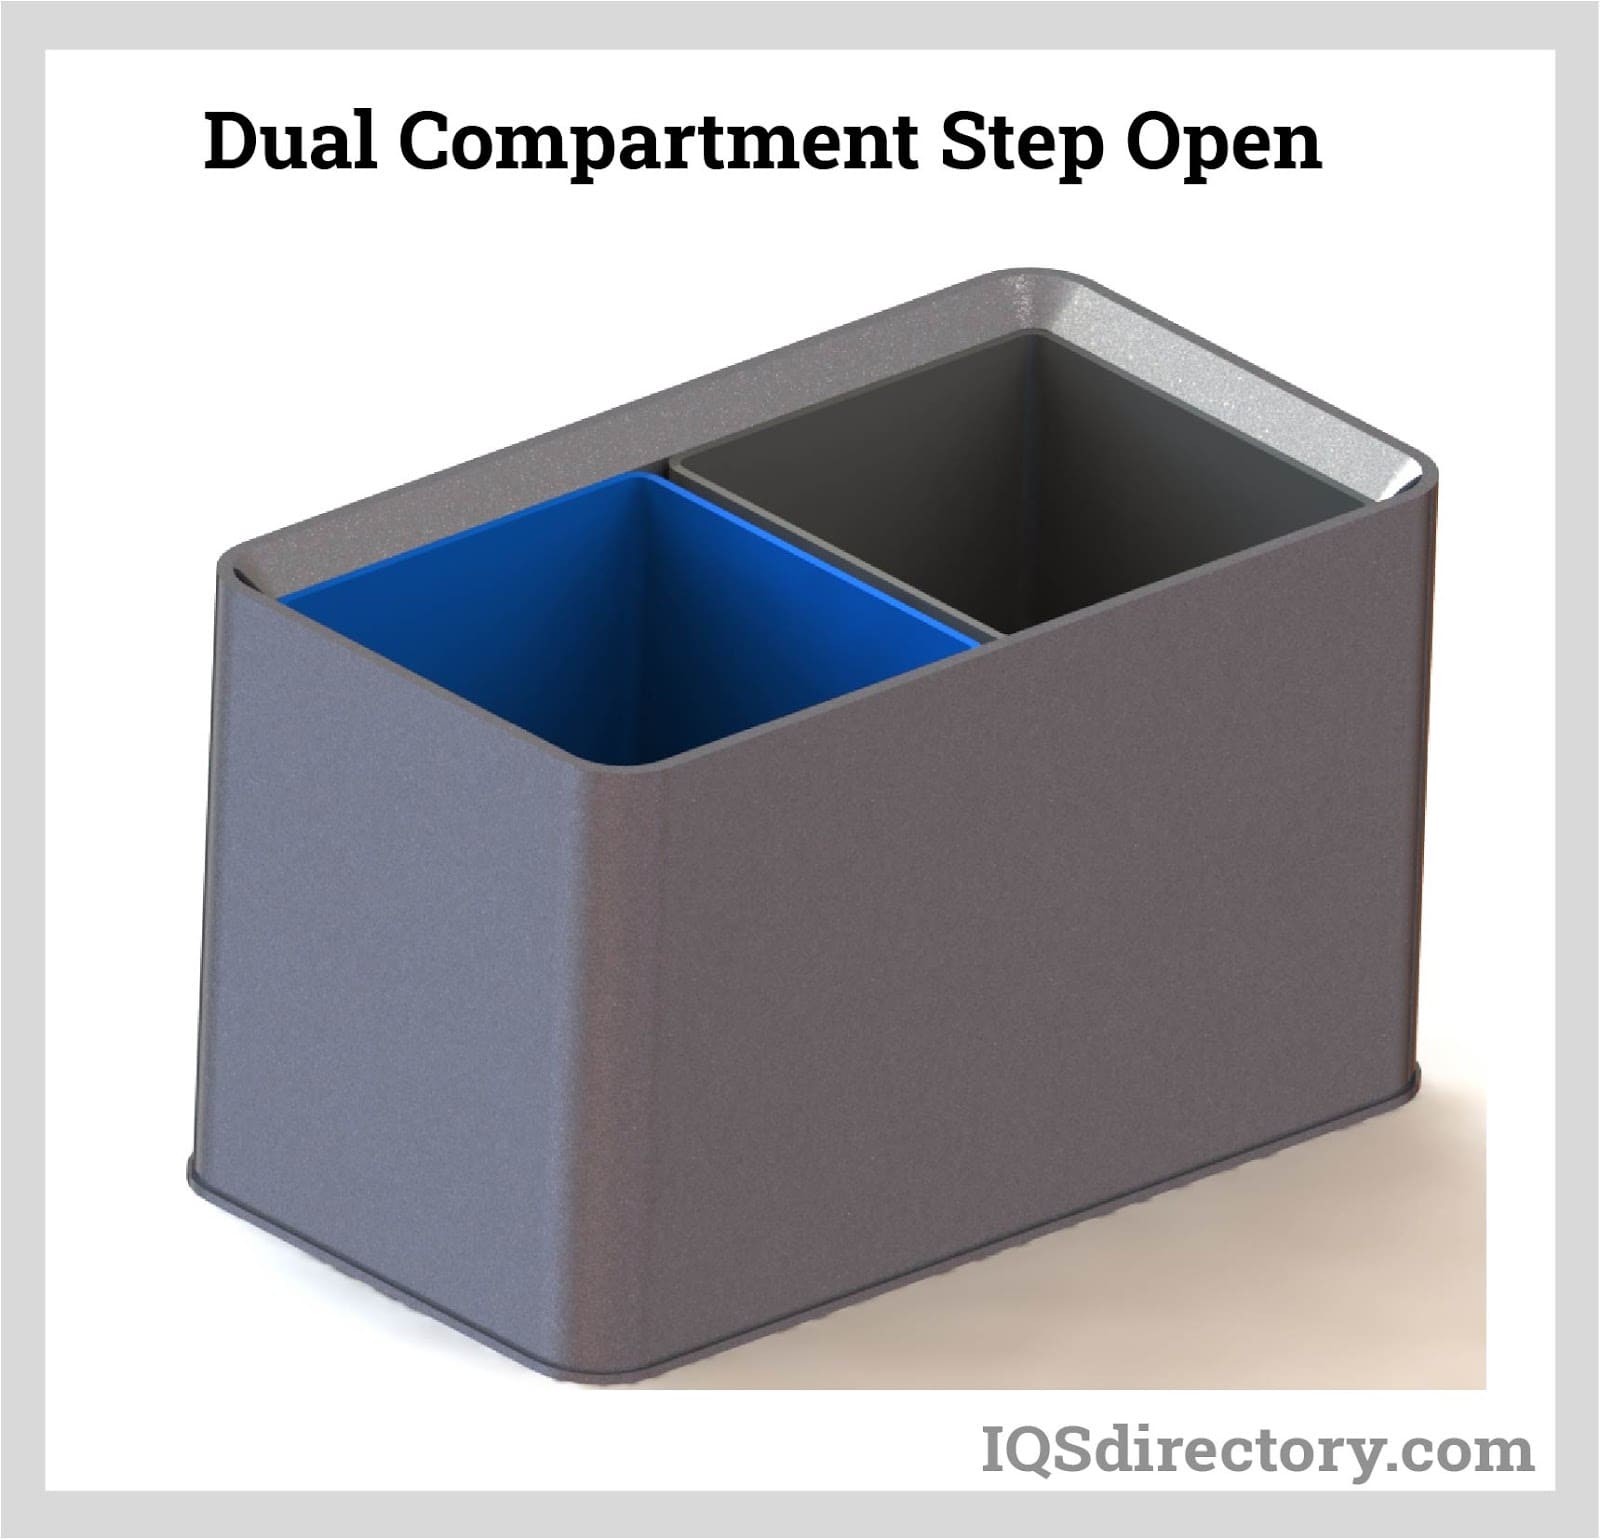 dual compartment step open